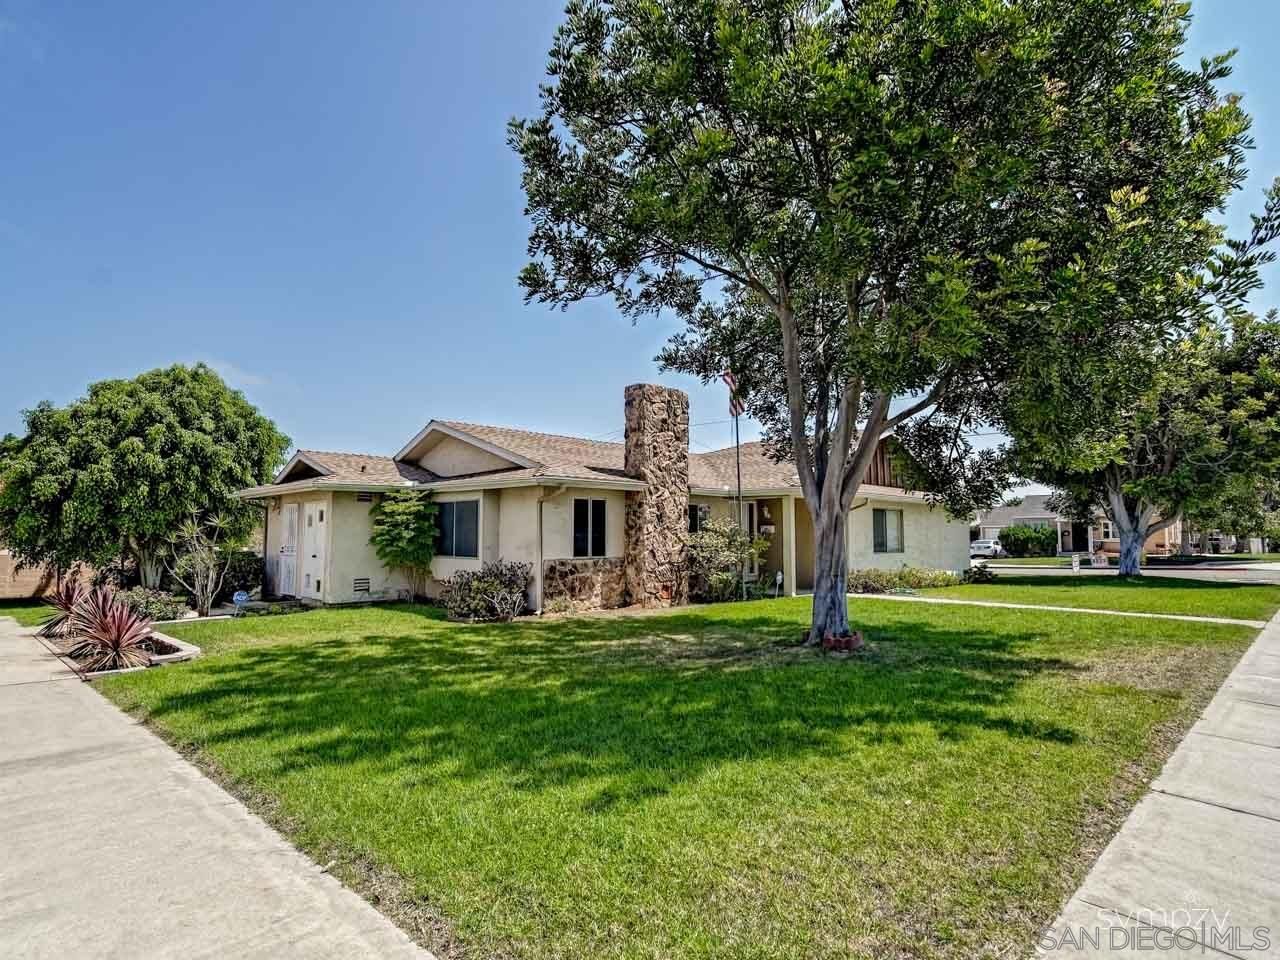 I have sold a property at 932 Ebony Avenue in Imperial Beach
